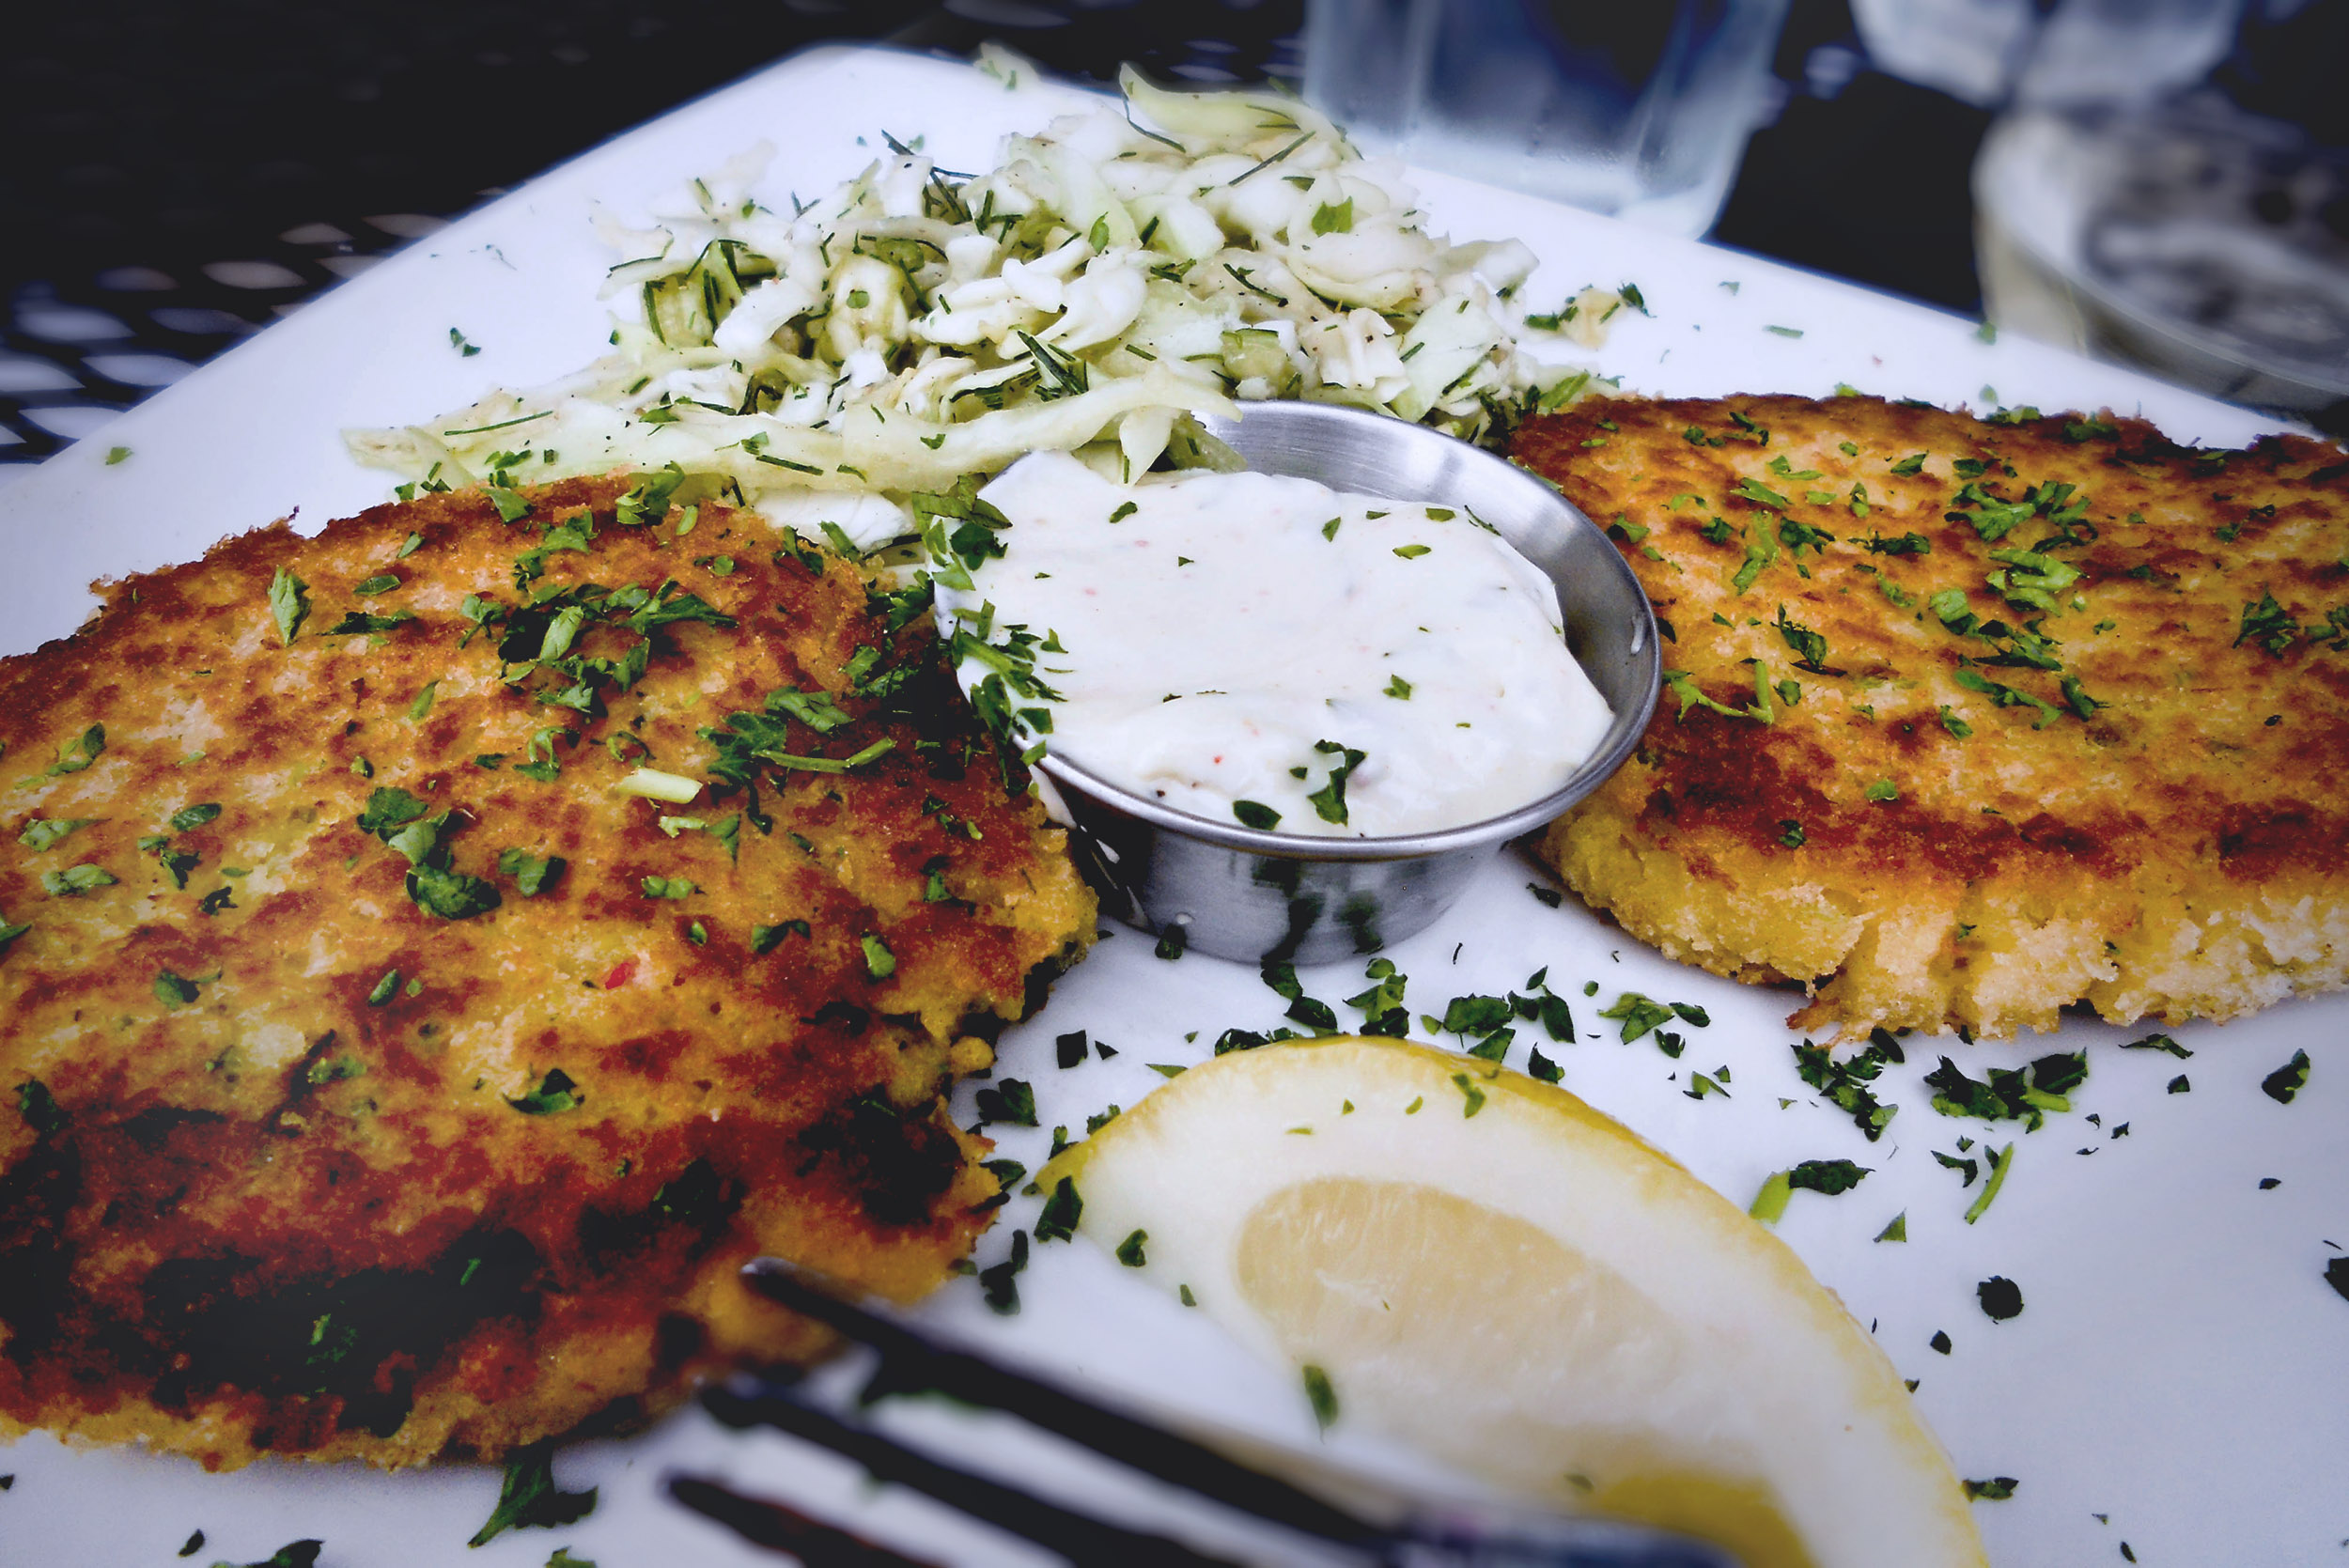 A platter with two dungeness crab cakes, fennel slaw, tartar sauce and a slice of lemon with a scattering of chopped chives.